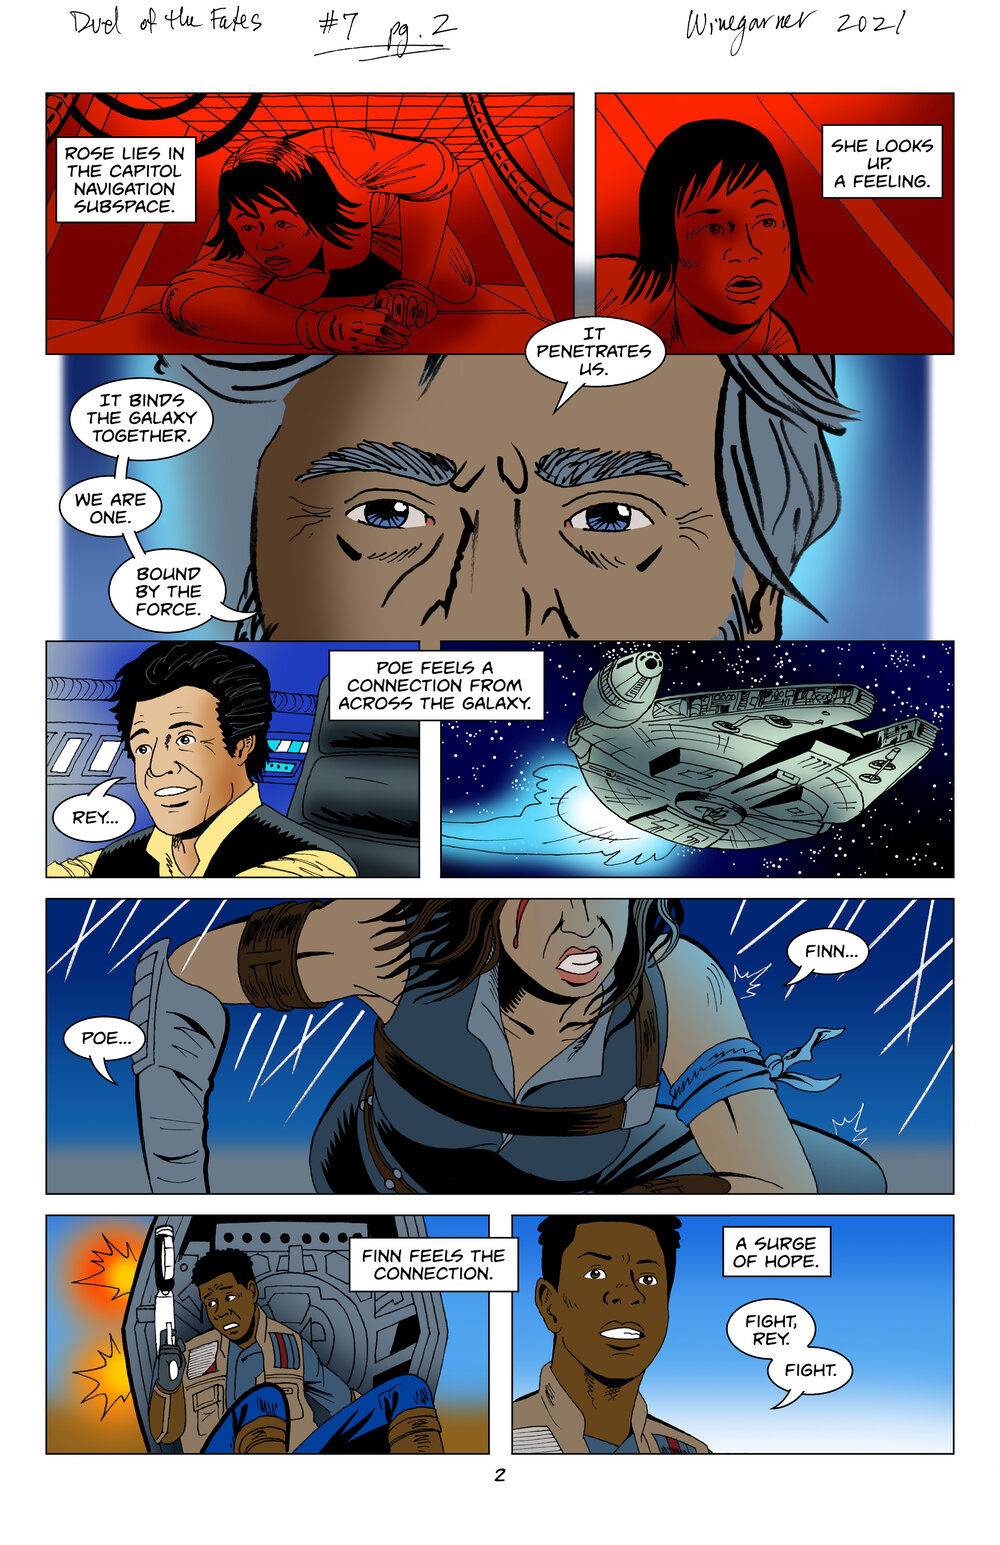 Star Wars: Duel of the Fates (2020-2021): Chapter 7 - Page 3